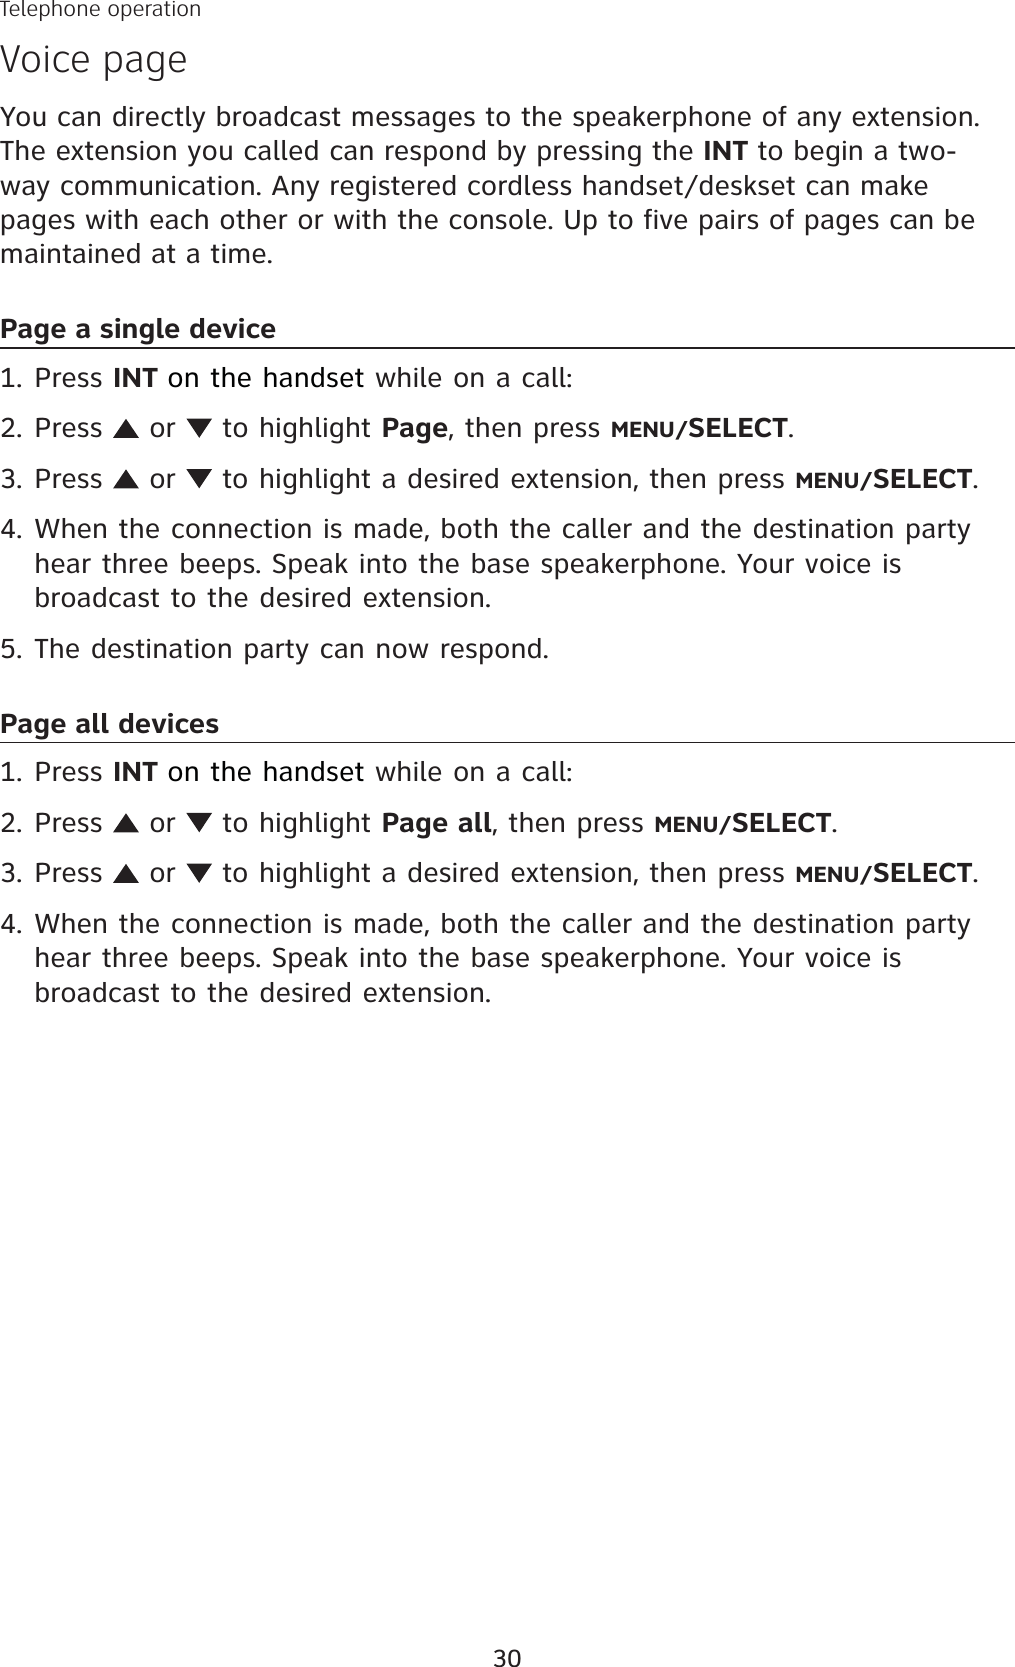 30You can directly broadcast messages to the speakerphone of any extension. The extension you called can respond by pressing the INT to begin a two-way communication. Any registered cordless handset/deskset can make pages with each other or with the console. Up to five pairs of pages can be maintained at a time. Page a single devicePress INT on the handset while on a call:Press   or   to highlight Page, then press MENU/SELECT.Press   or   to highlight a desired extension, then press MENU/SELECT.When the connection is made, both the caller and the destination party hear three beeps. Speak into the base speakerphone. Your voice is broadcast to the desired extension. The destination party can now respond.Page all devicesPress INT on the handset while on a call:Press   or   to highlight Page all, then press MENU/SELECT.Press   or   to highlight a desired extension, then press MENU/SELECT.When the connection is made, both the caller and the destination party hear three beeps. Speak into the base speakerphone. Your voice is broadcast to the desired extension. 1.2.3.4.5.1.2.3.4.Telephone operationVoice page